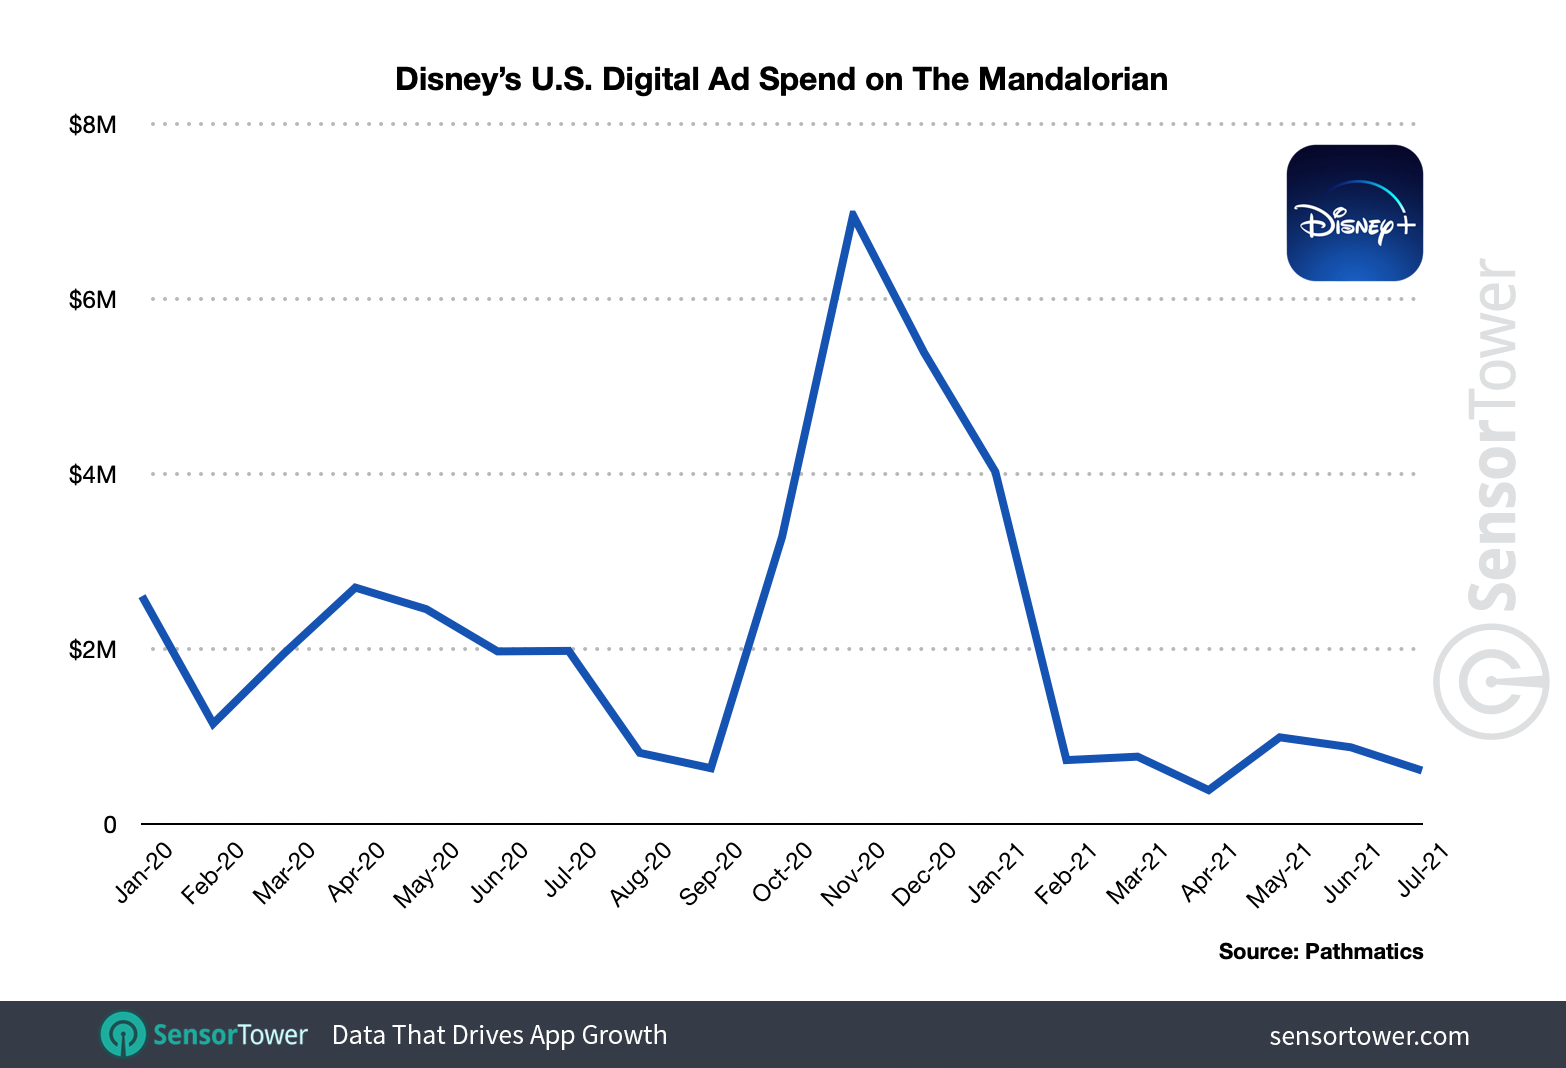 93 percent of Disney+'s promotion in the U.S. for The Mandalorian was on desktop video ads